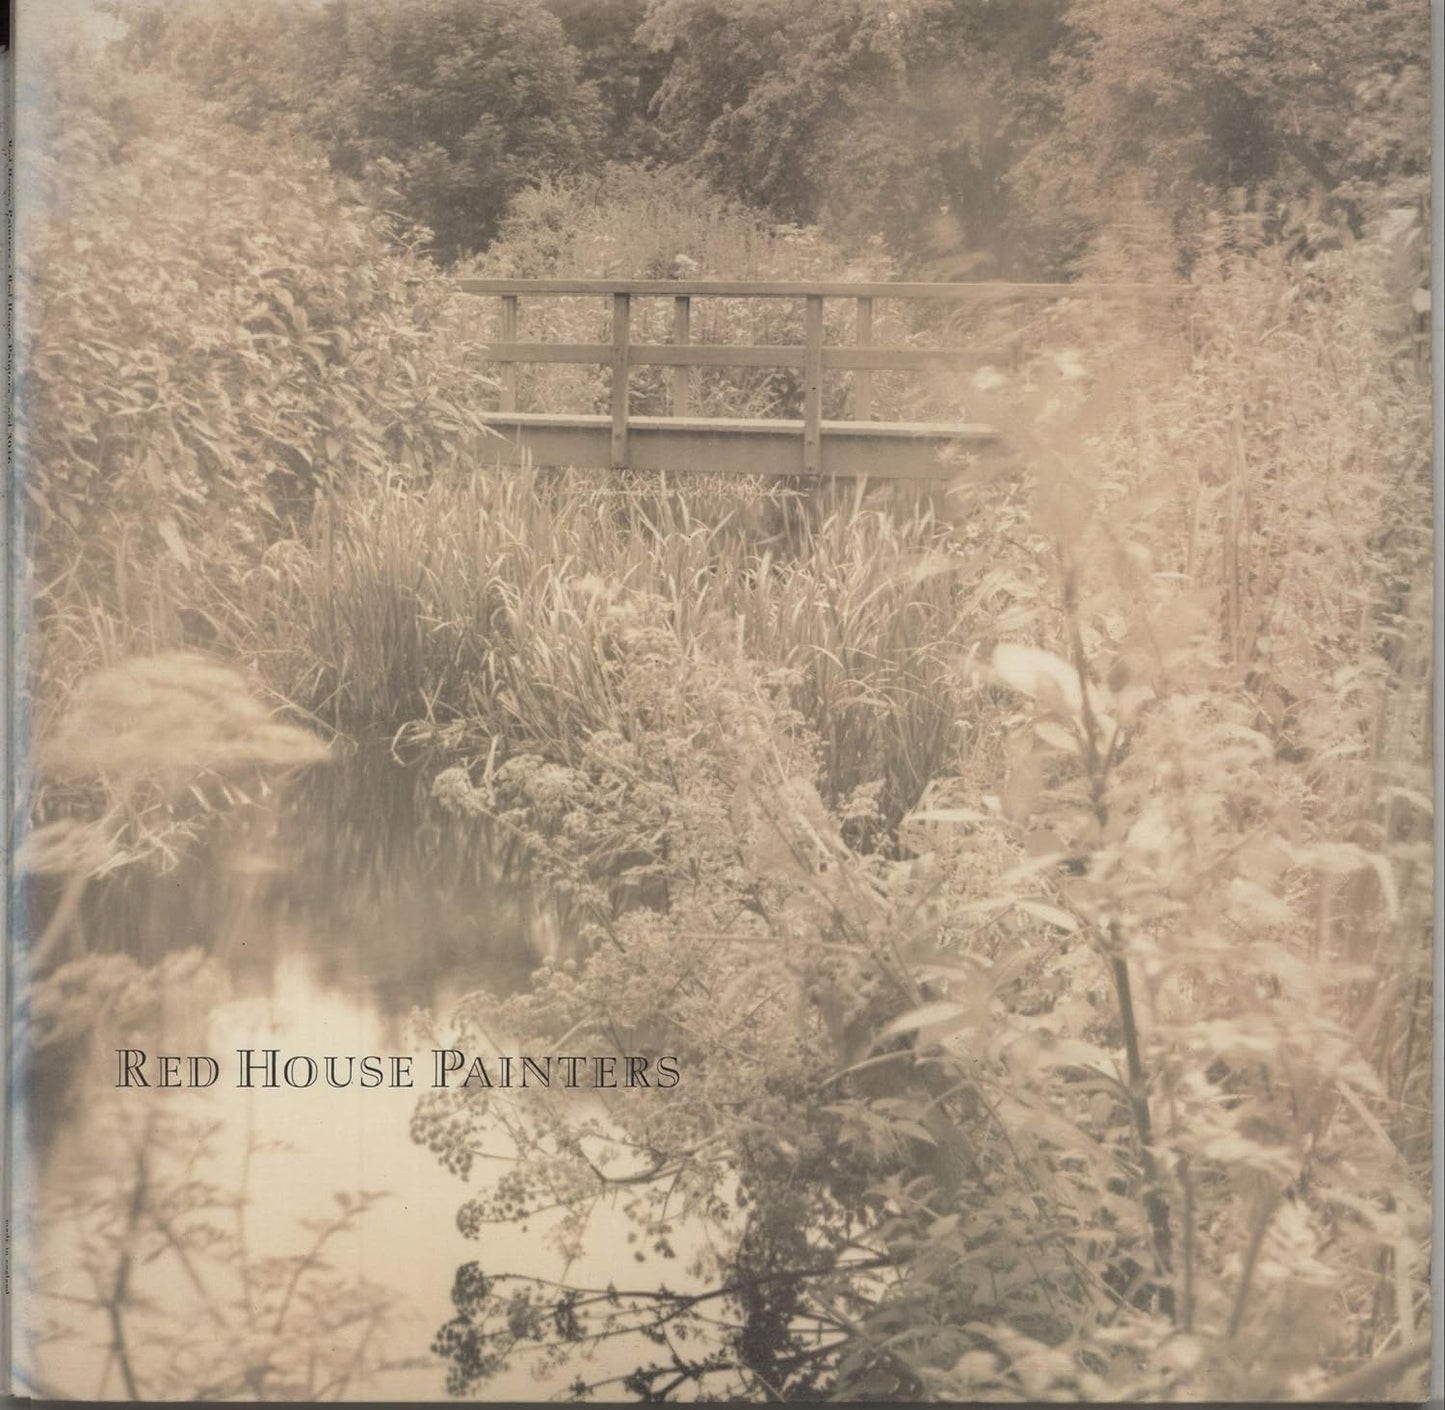 Red House Painters - Red House Painters: Bridge